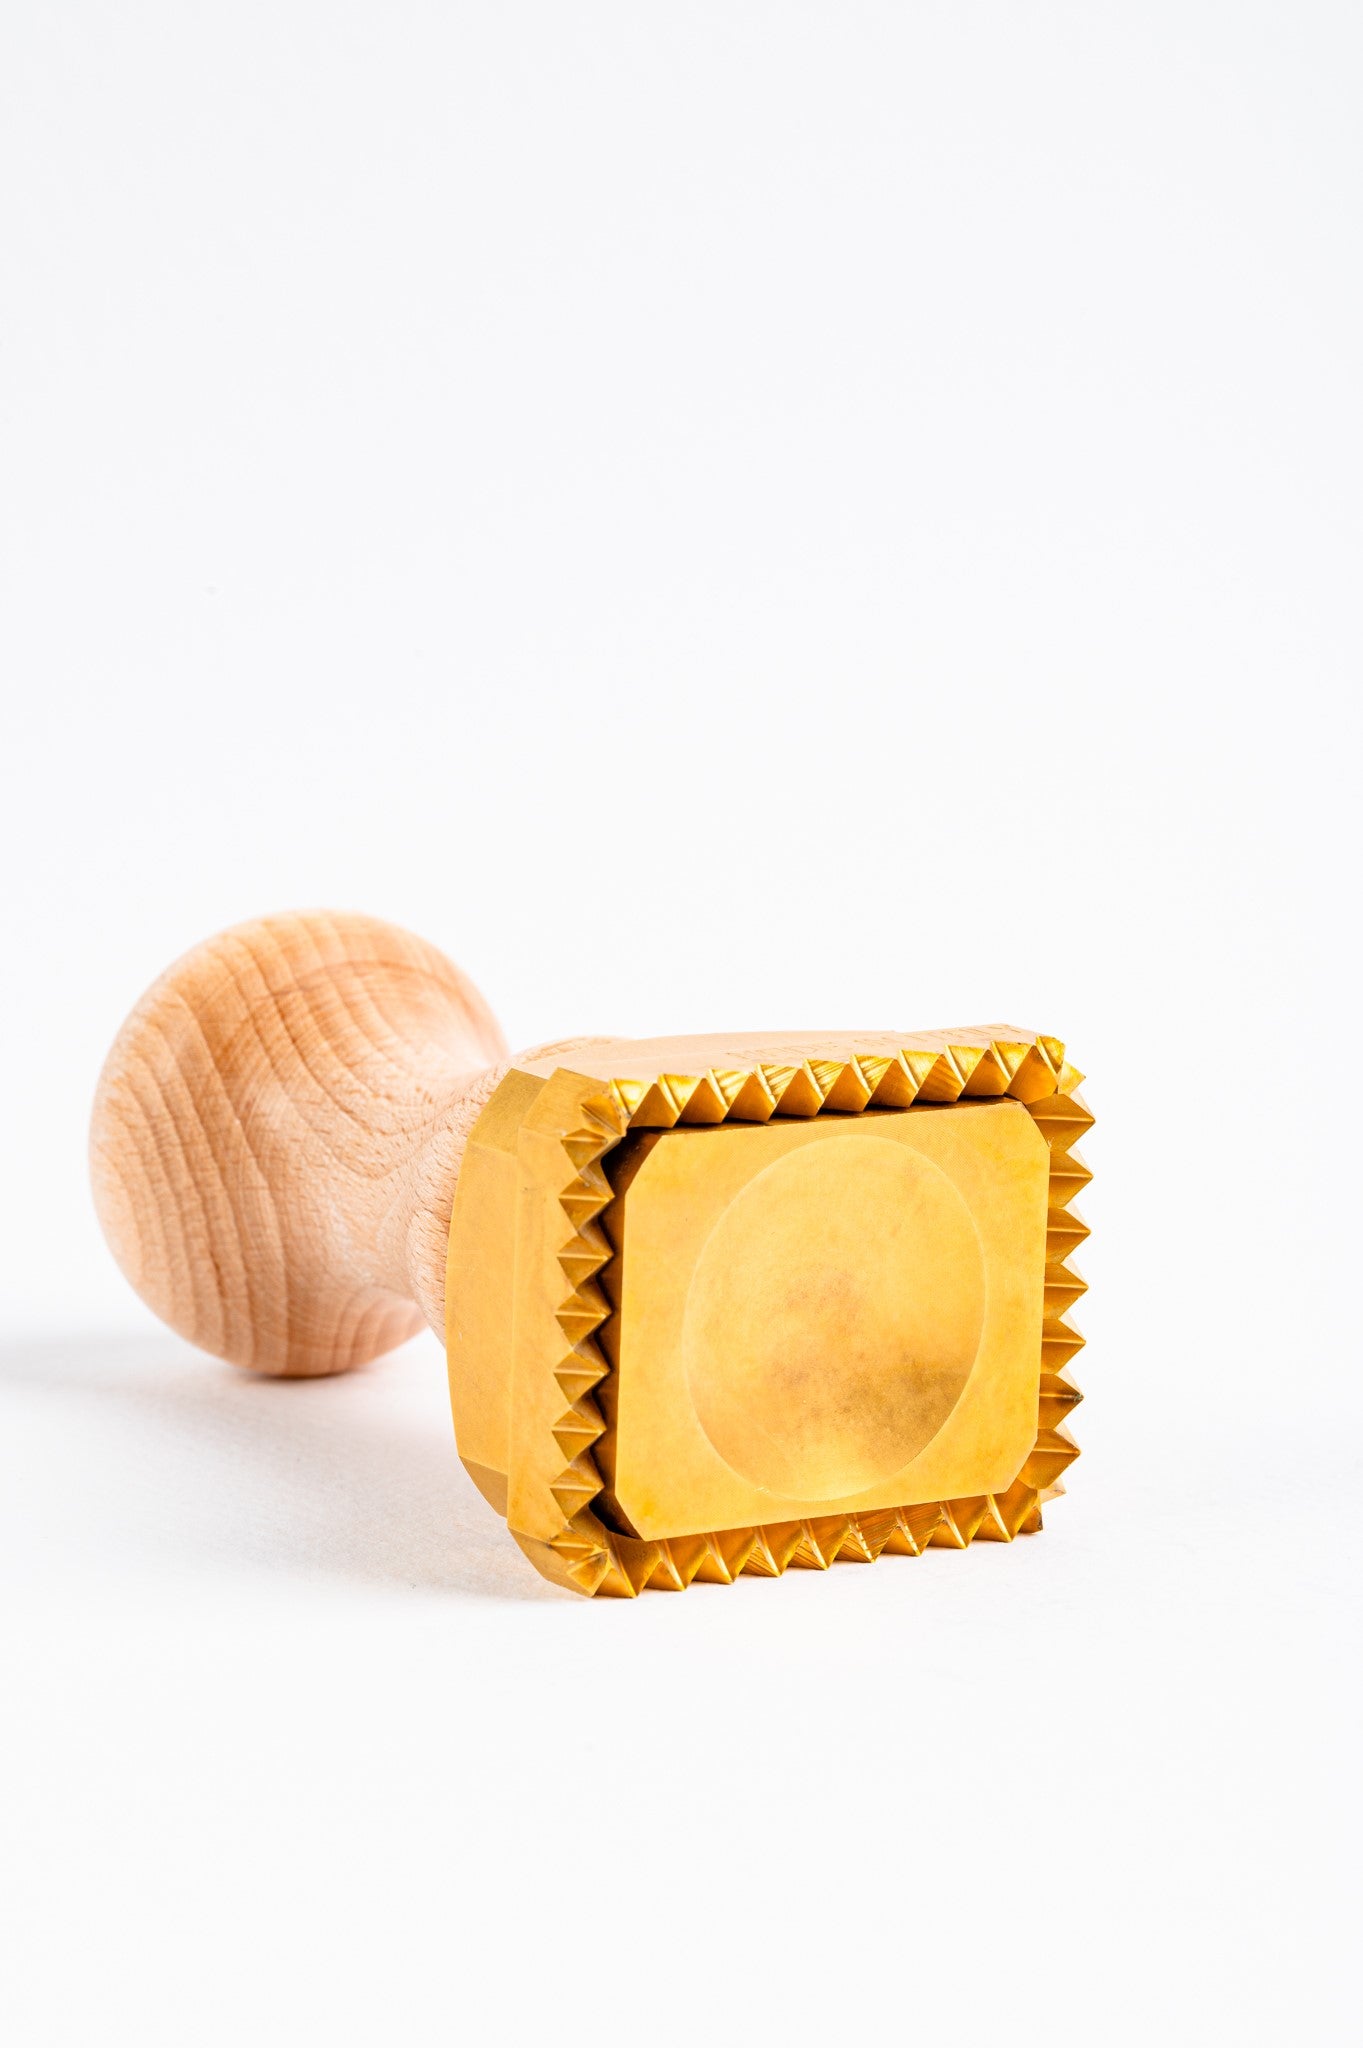 Professional set of two pasta and ravioli stamps: 1 Rectangle (45×55) and 1 Fluted Round (diam. 50mm); and one pasta and ravioli fluted cutter.